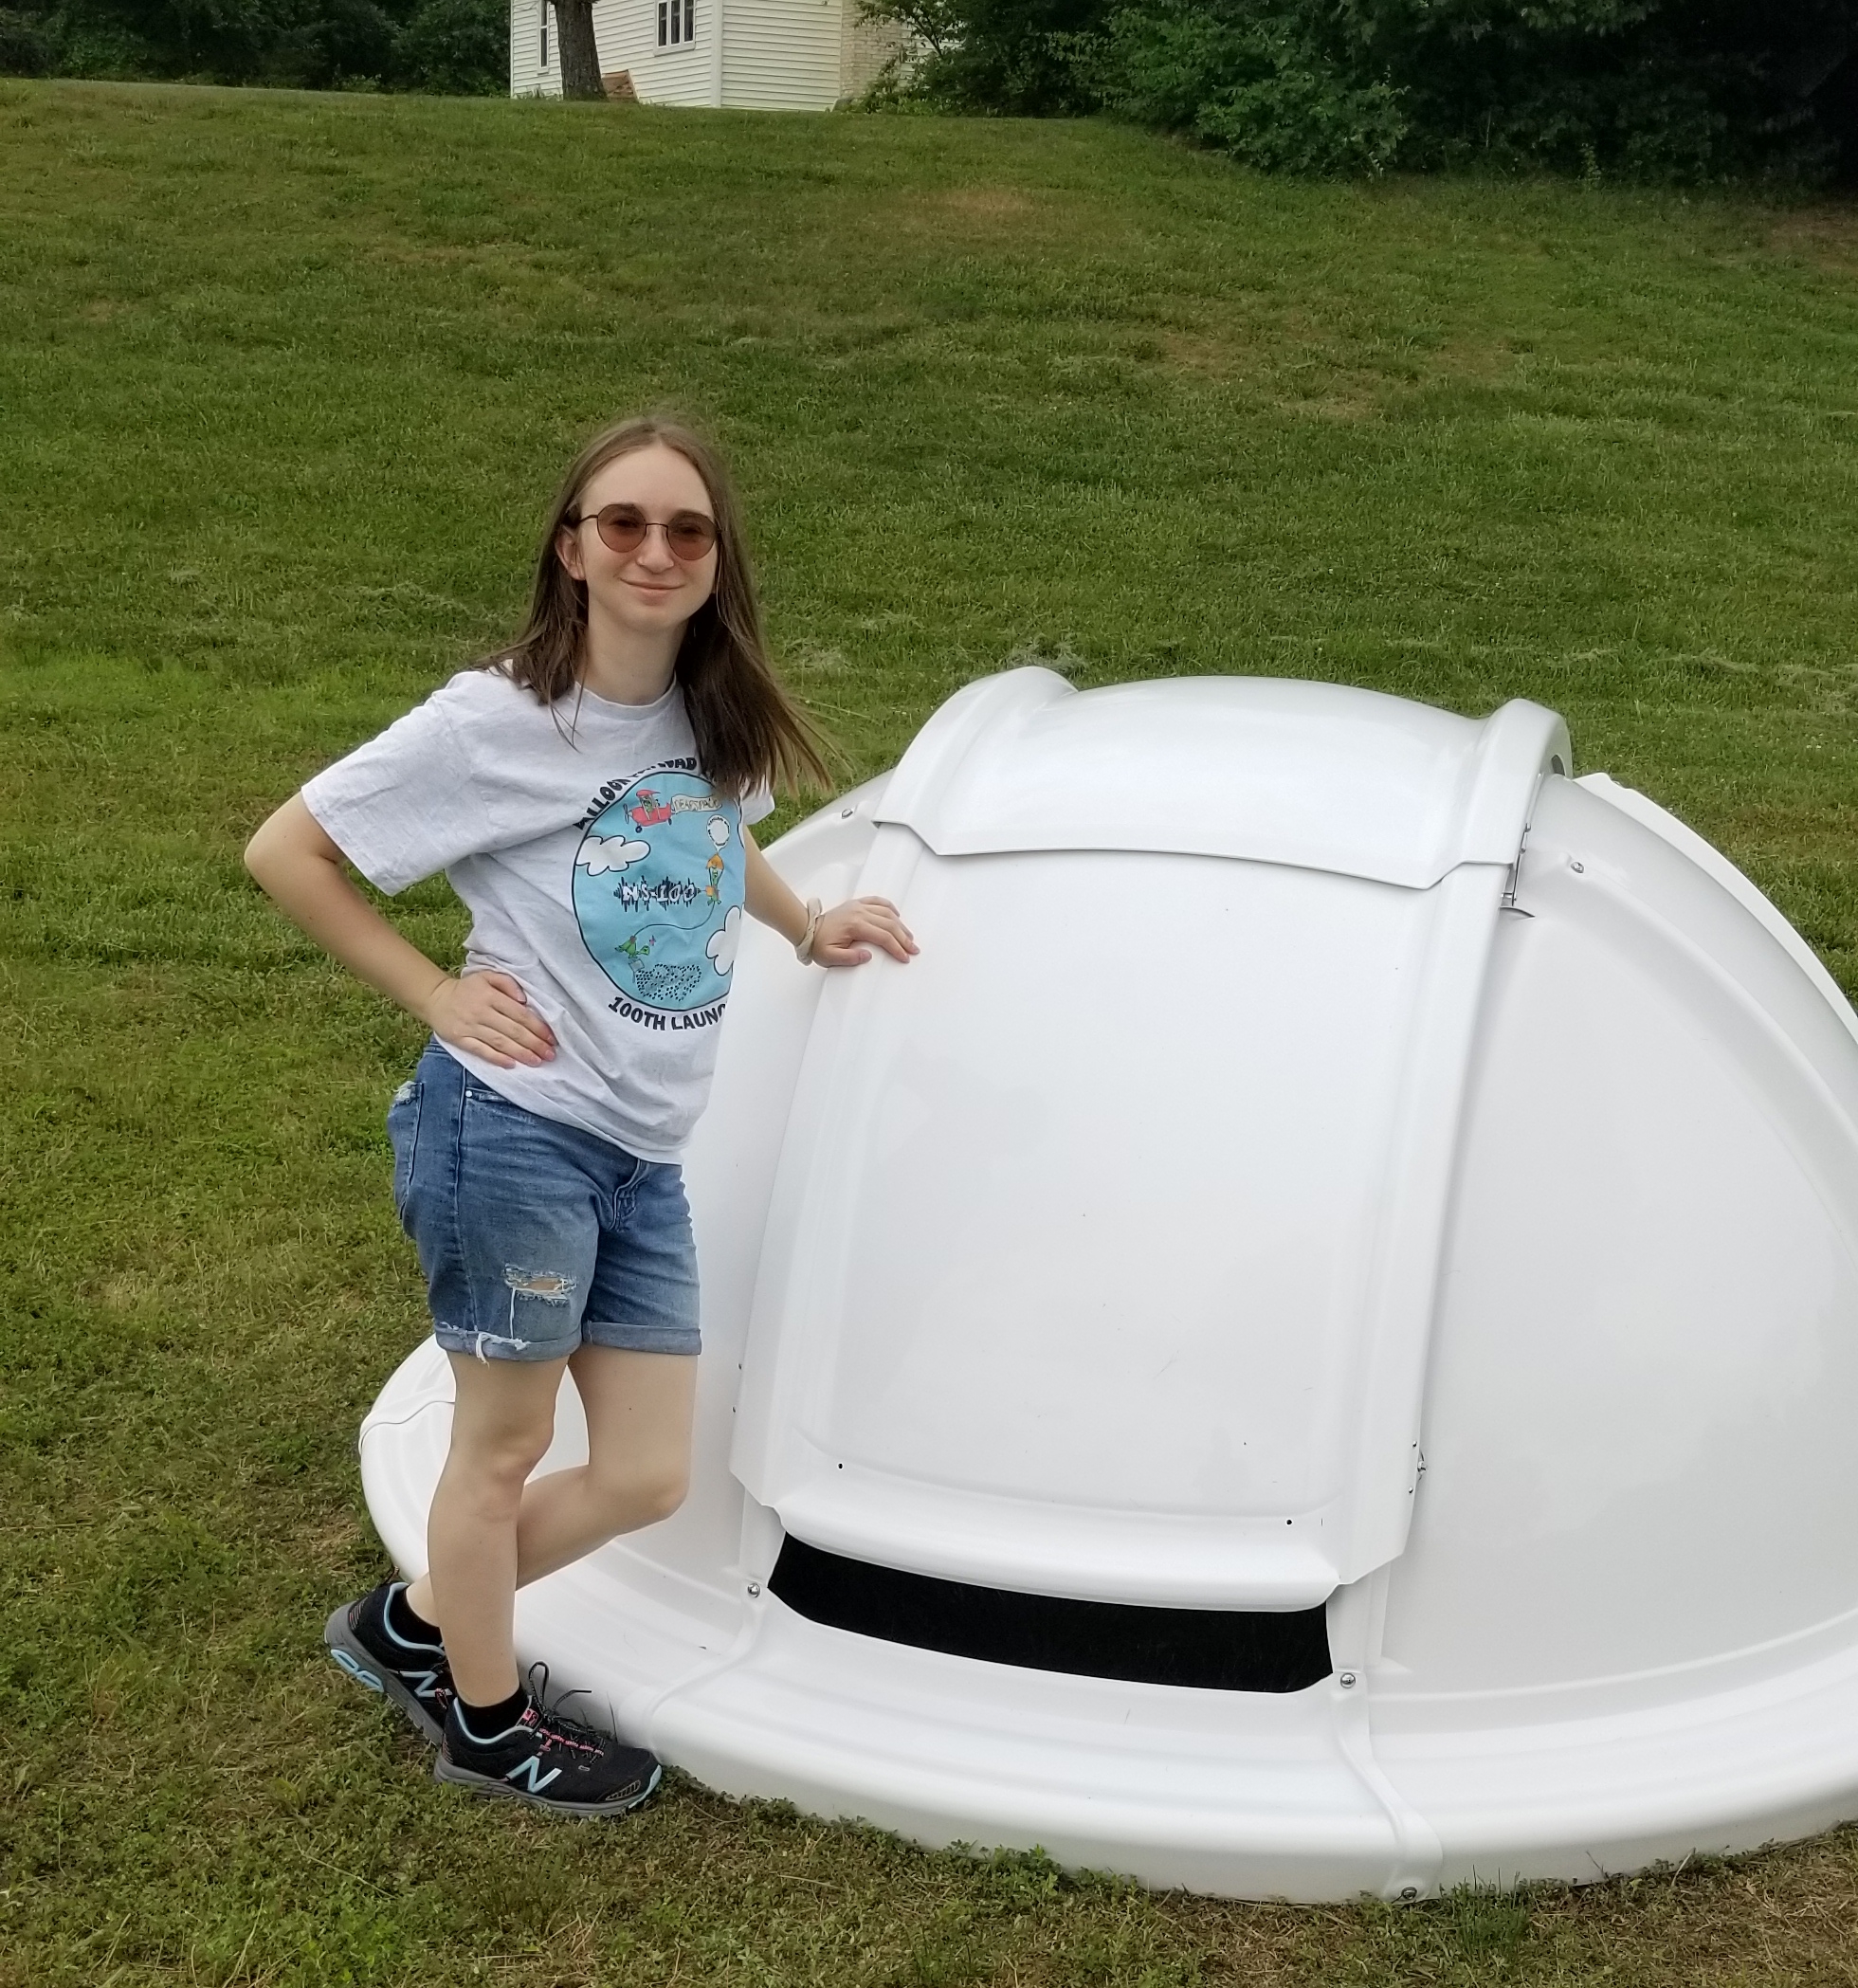 ALPHA Summer Intern Julianna Reese poses with assembled observatory dome